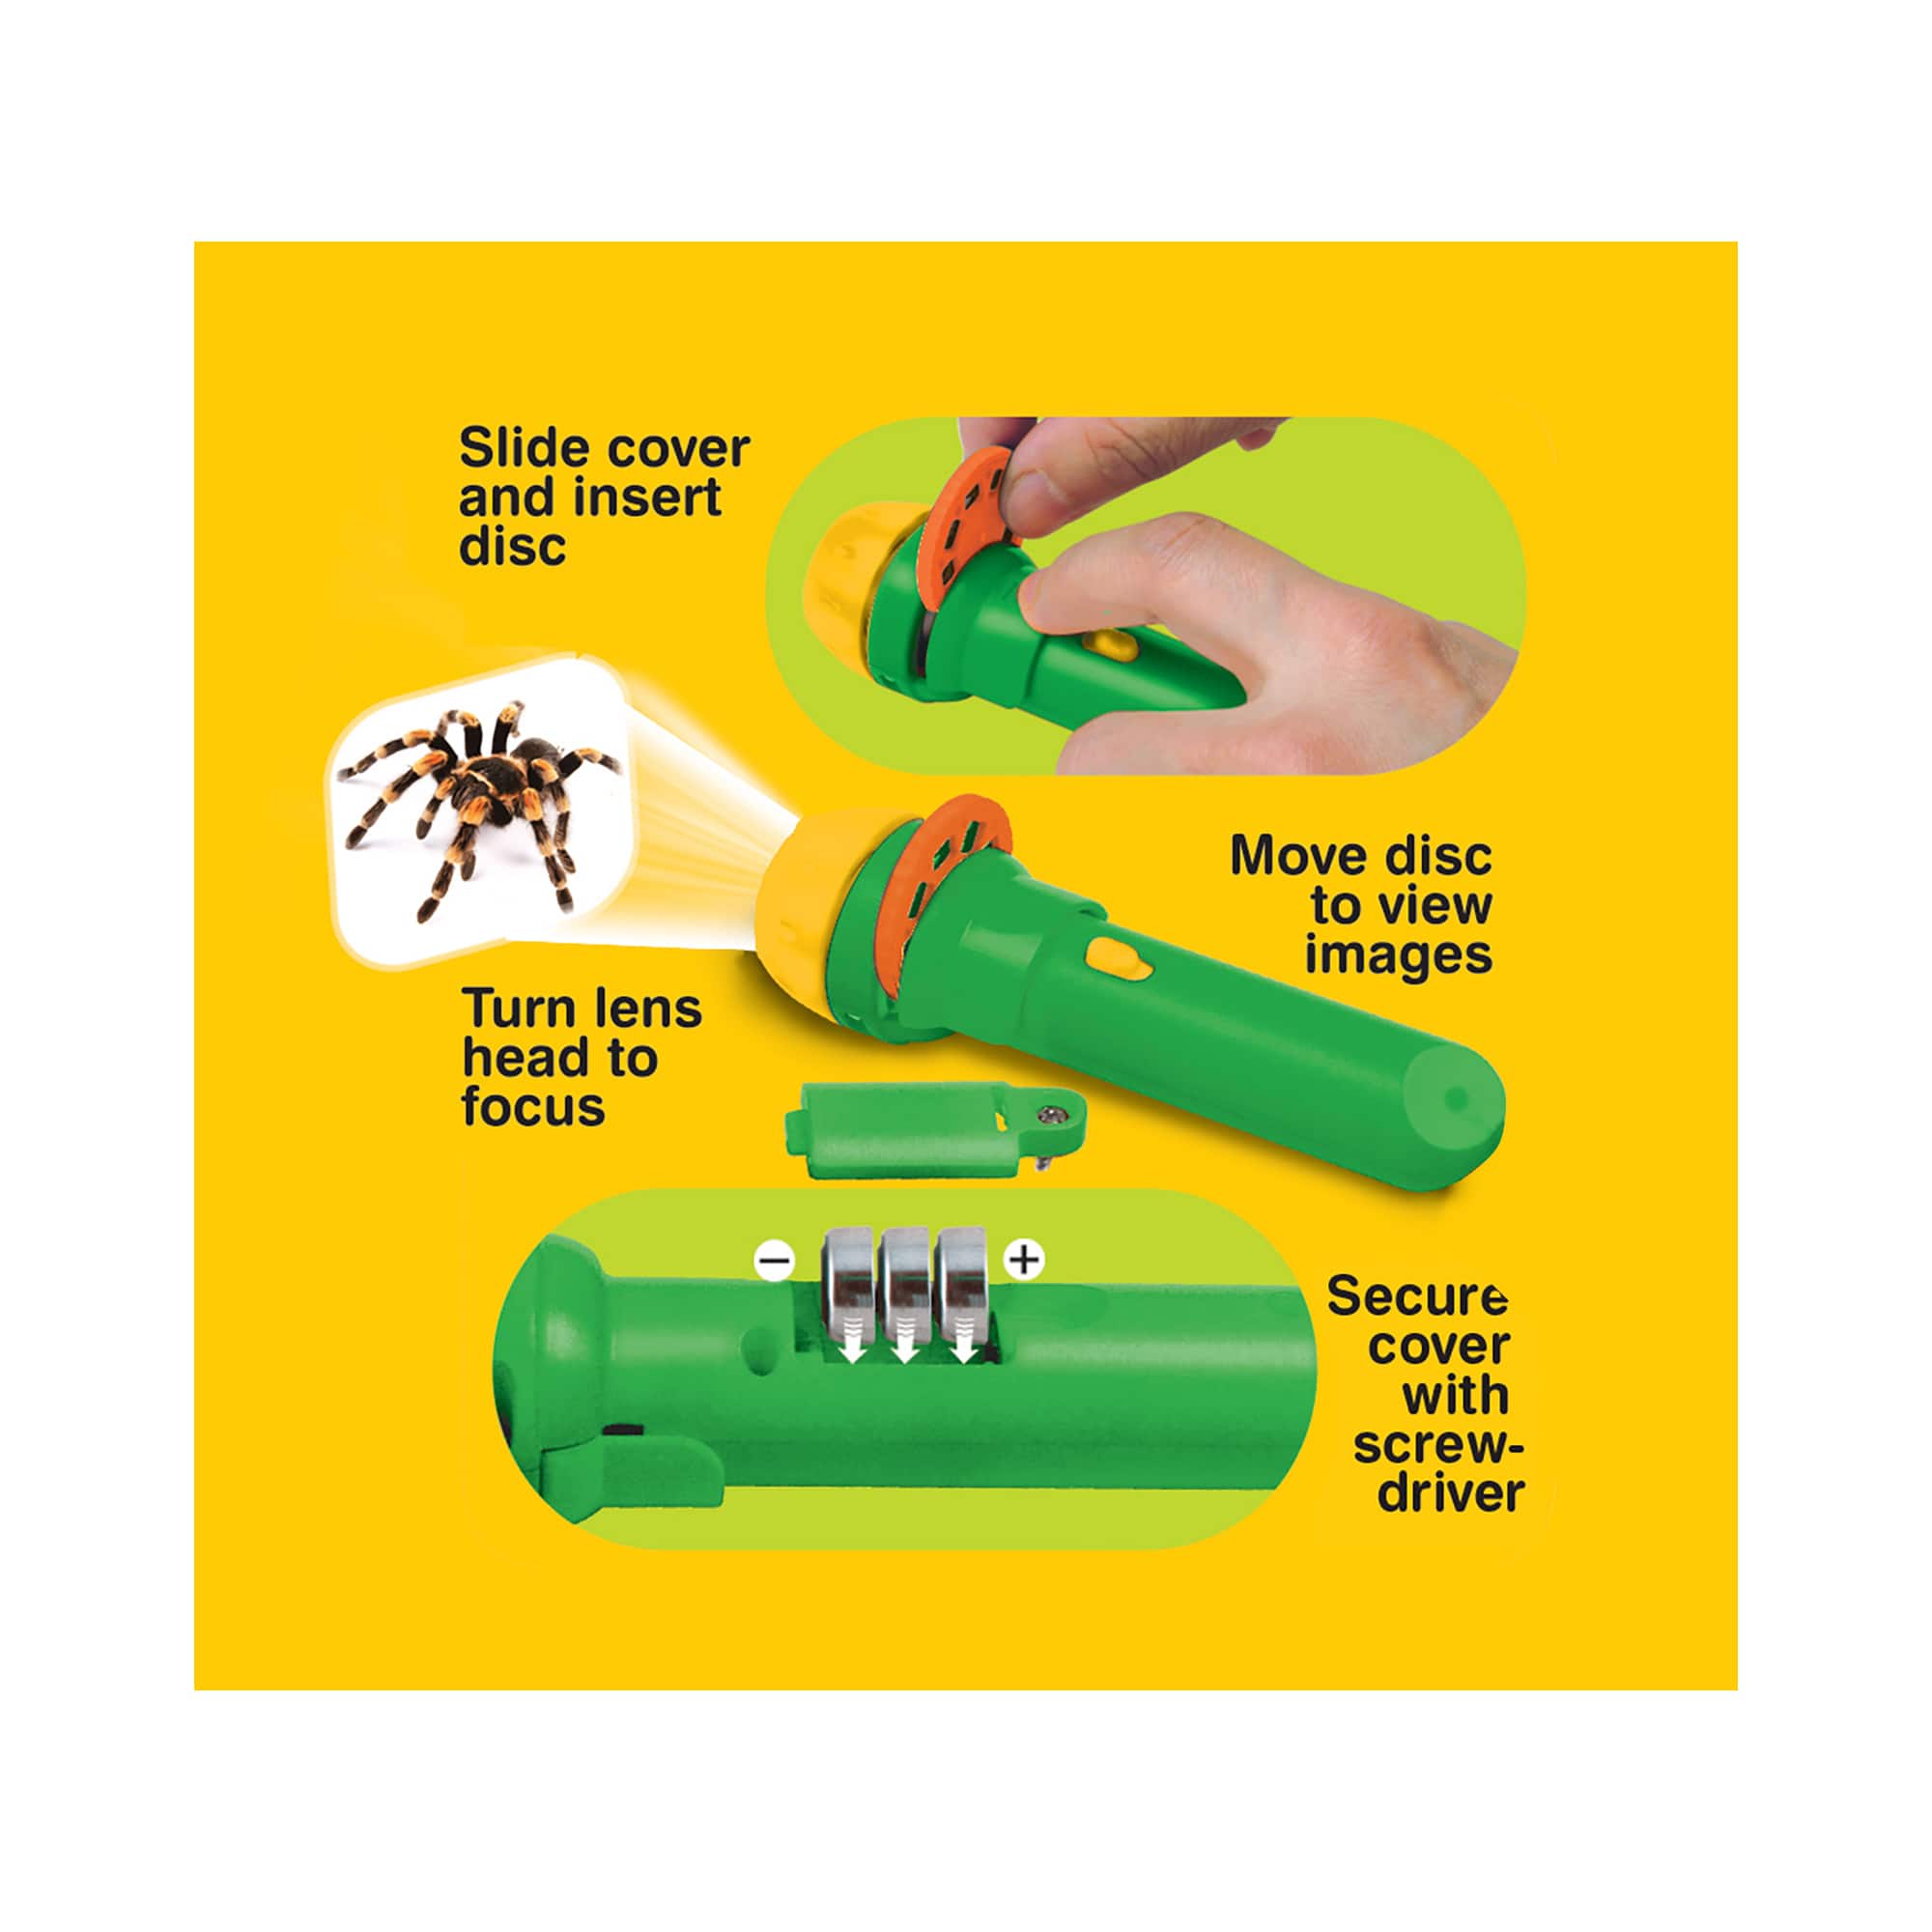 Brainstorm Toys Natural History Museum Creepy Crawly Torch &#x26; Projector